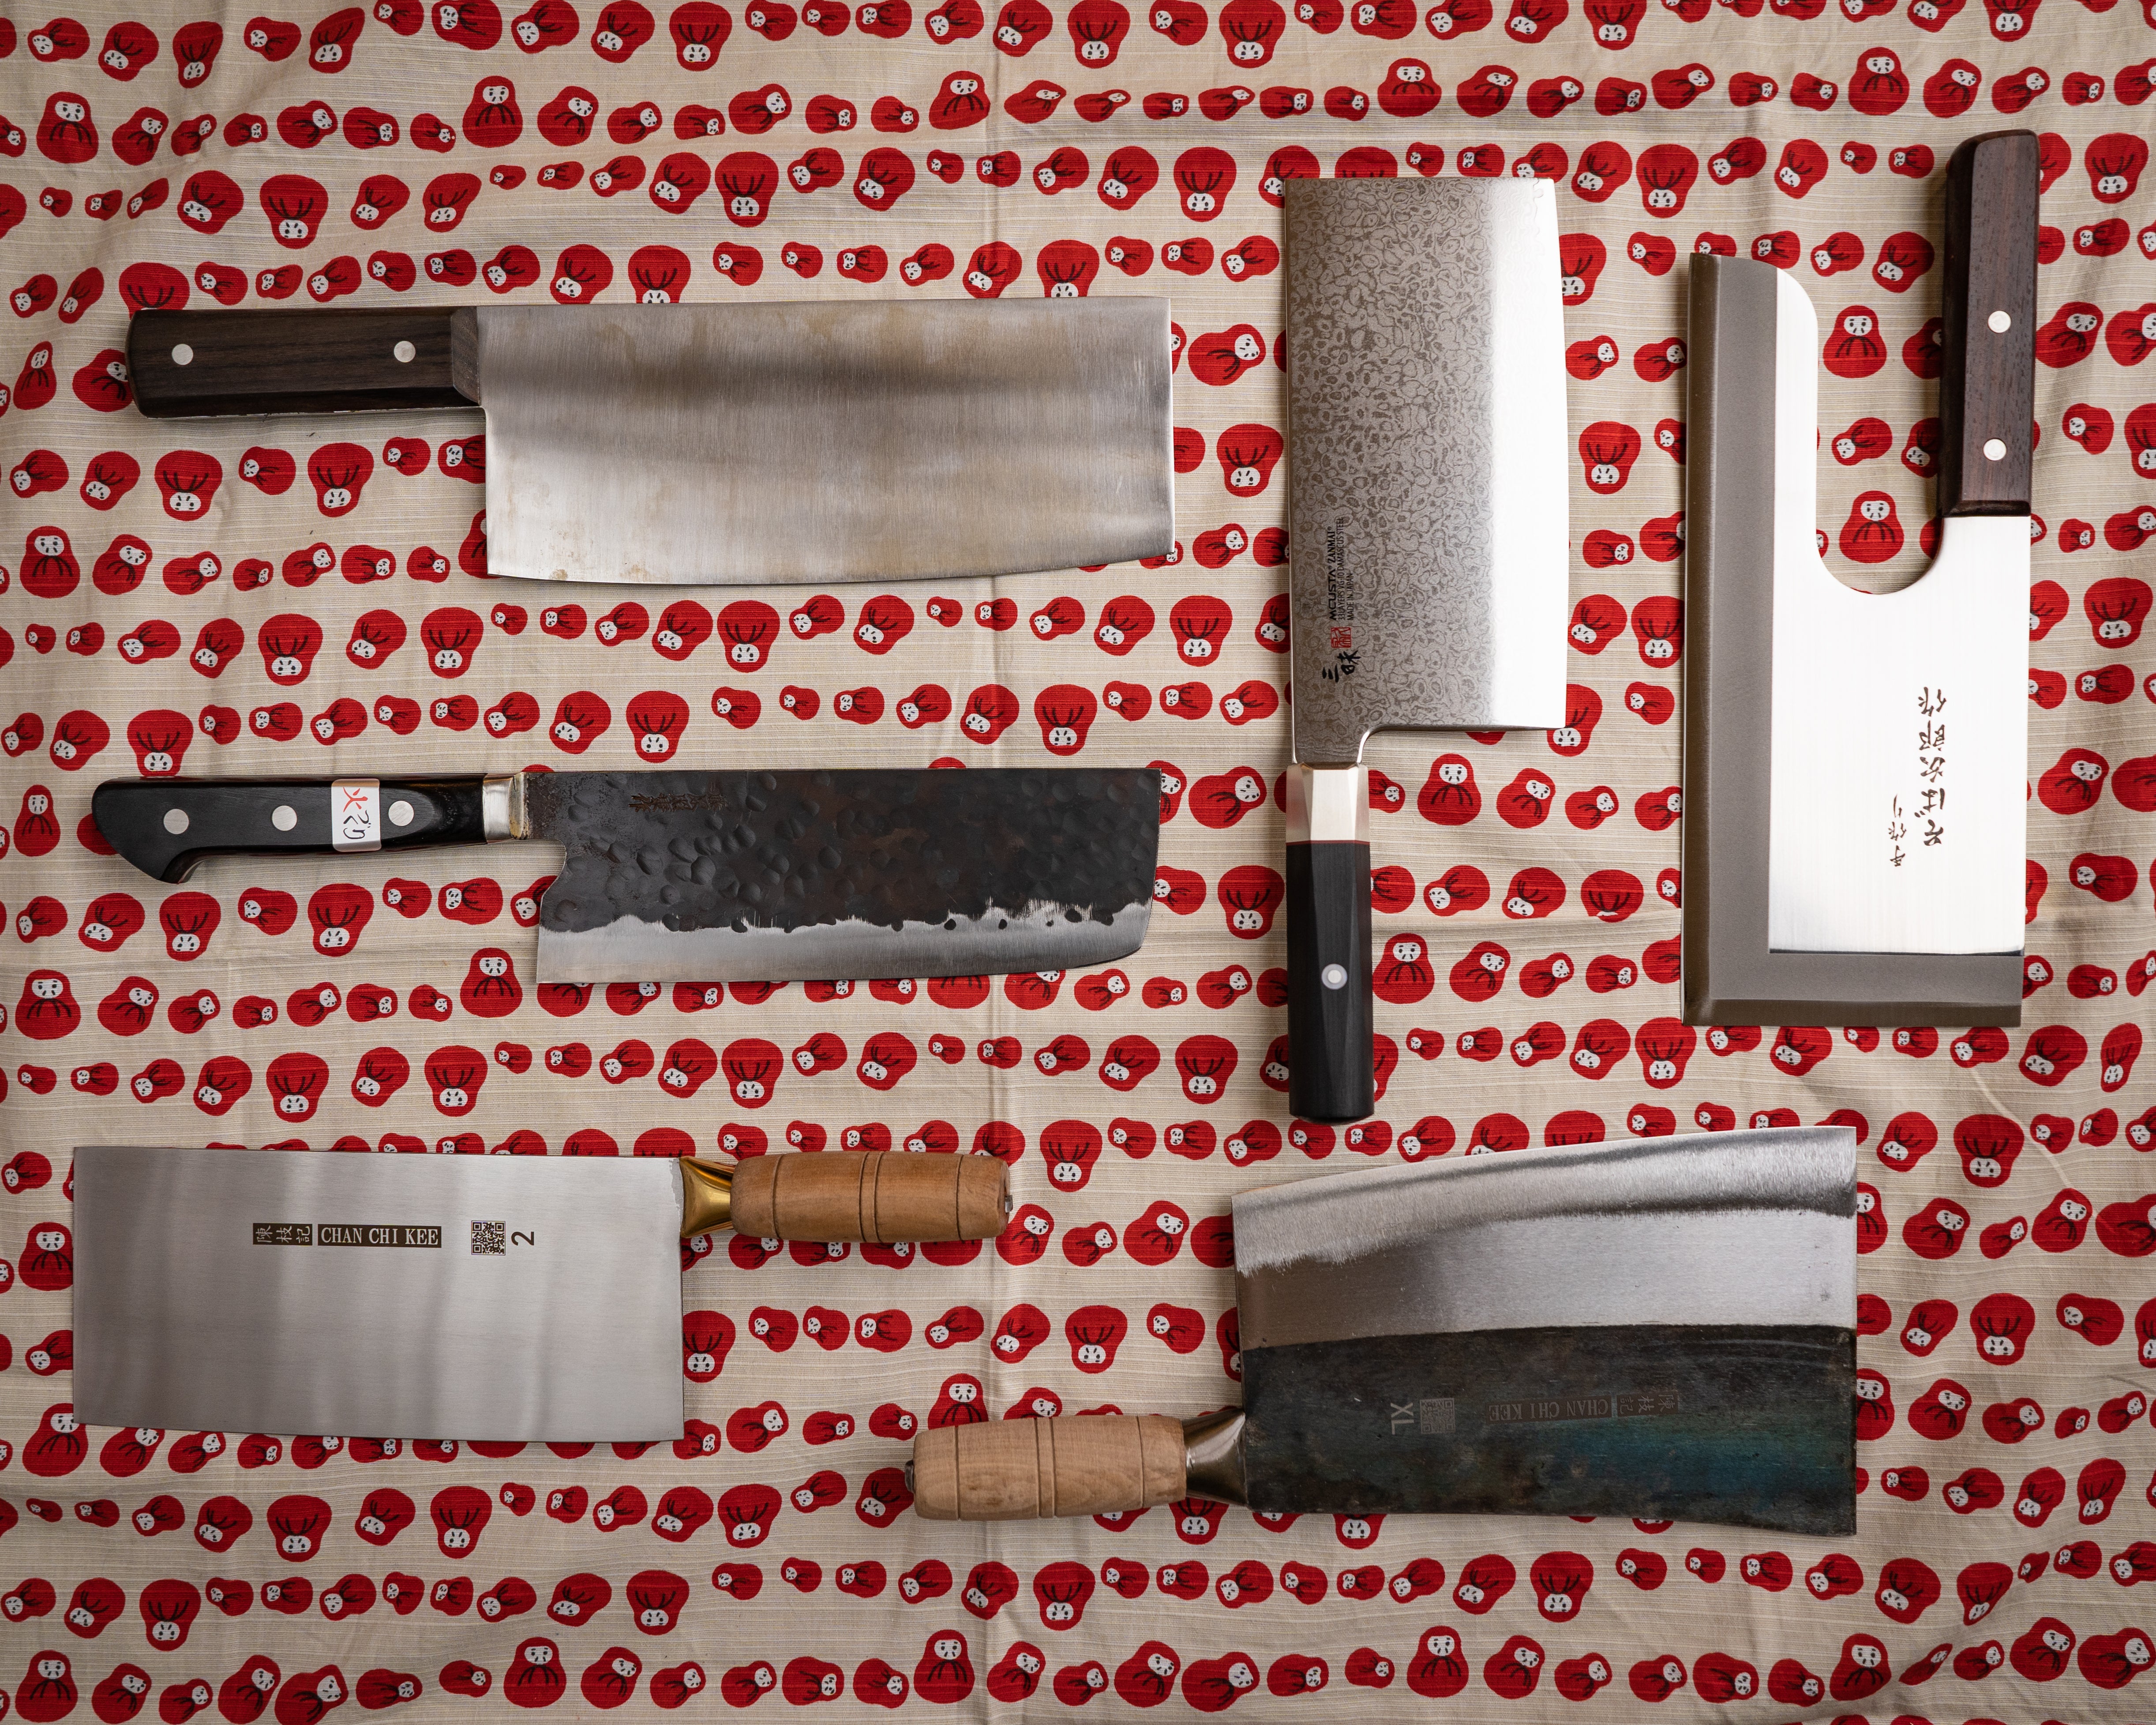 Anyone Like or Collect Knives from the Various Chinese Makers